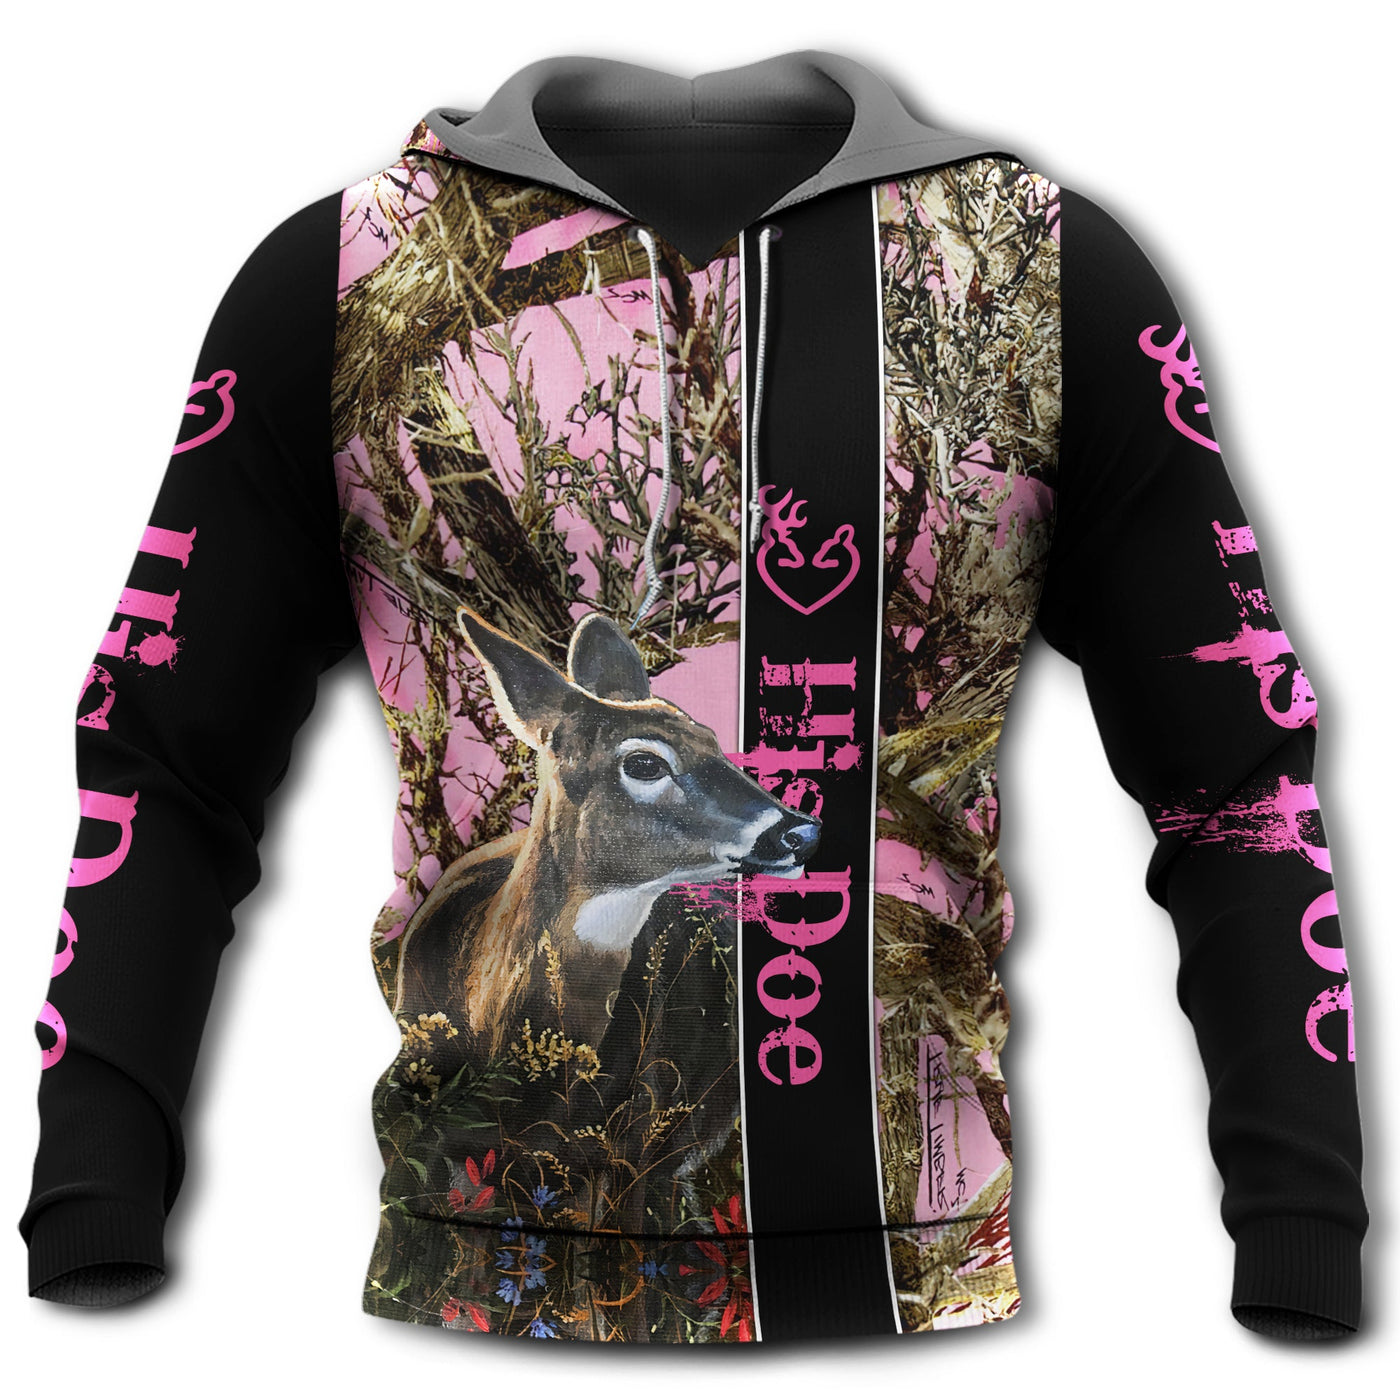 Unisex Hoodie His Doe / S Hunting Buck And Doe Deer Hunting You & Me Got This with Pink and Blue - Hoodie - Owls Matrix LTD